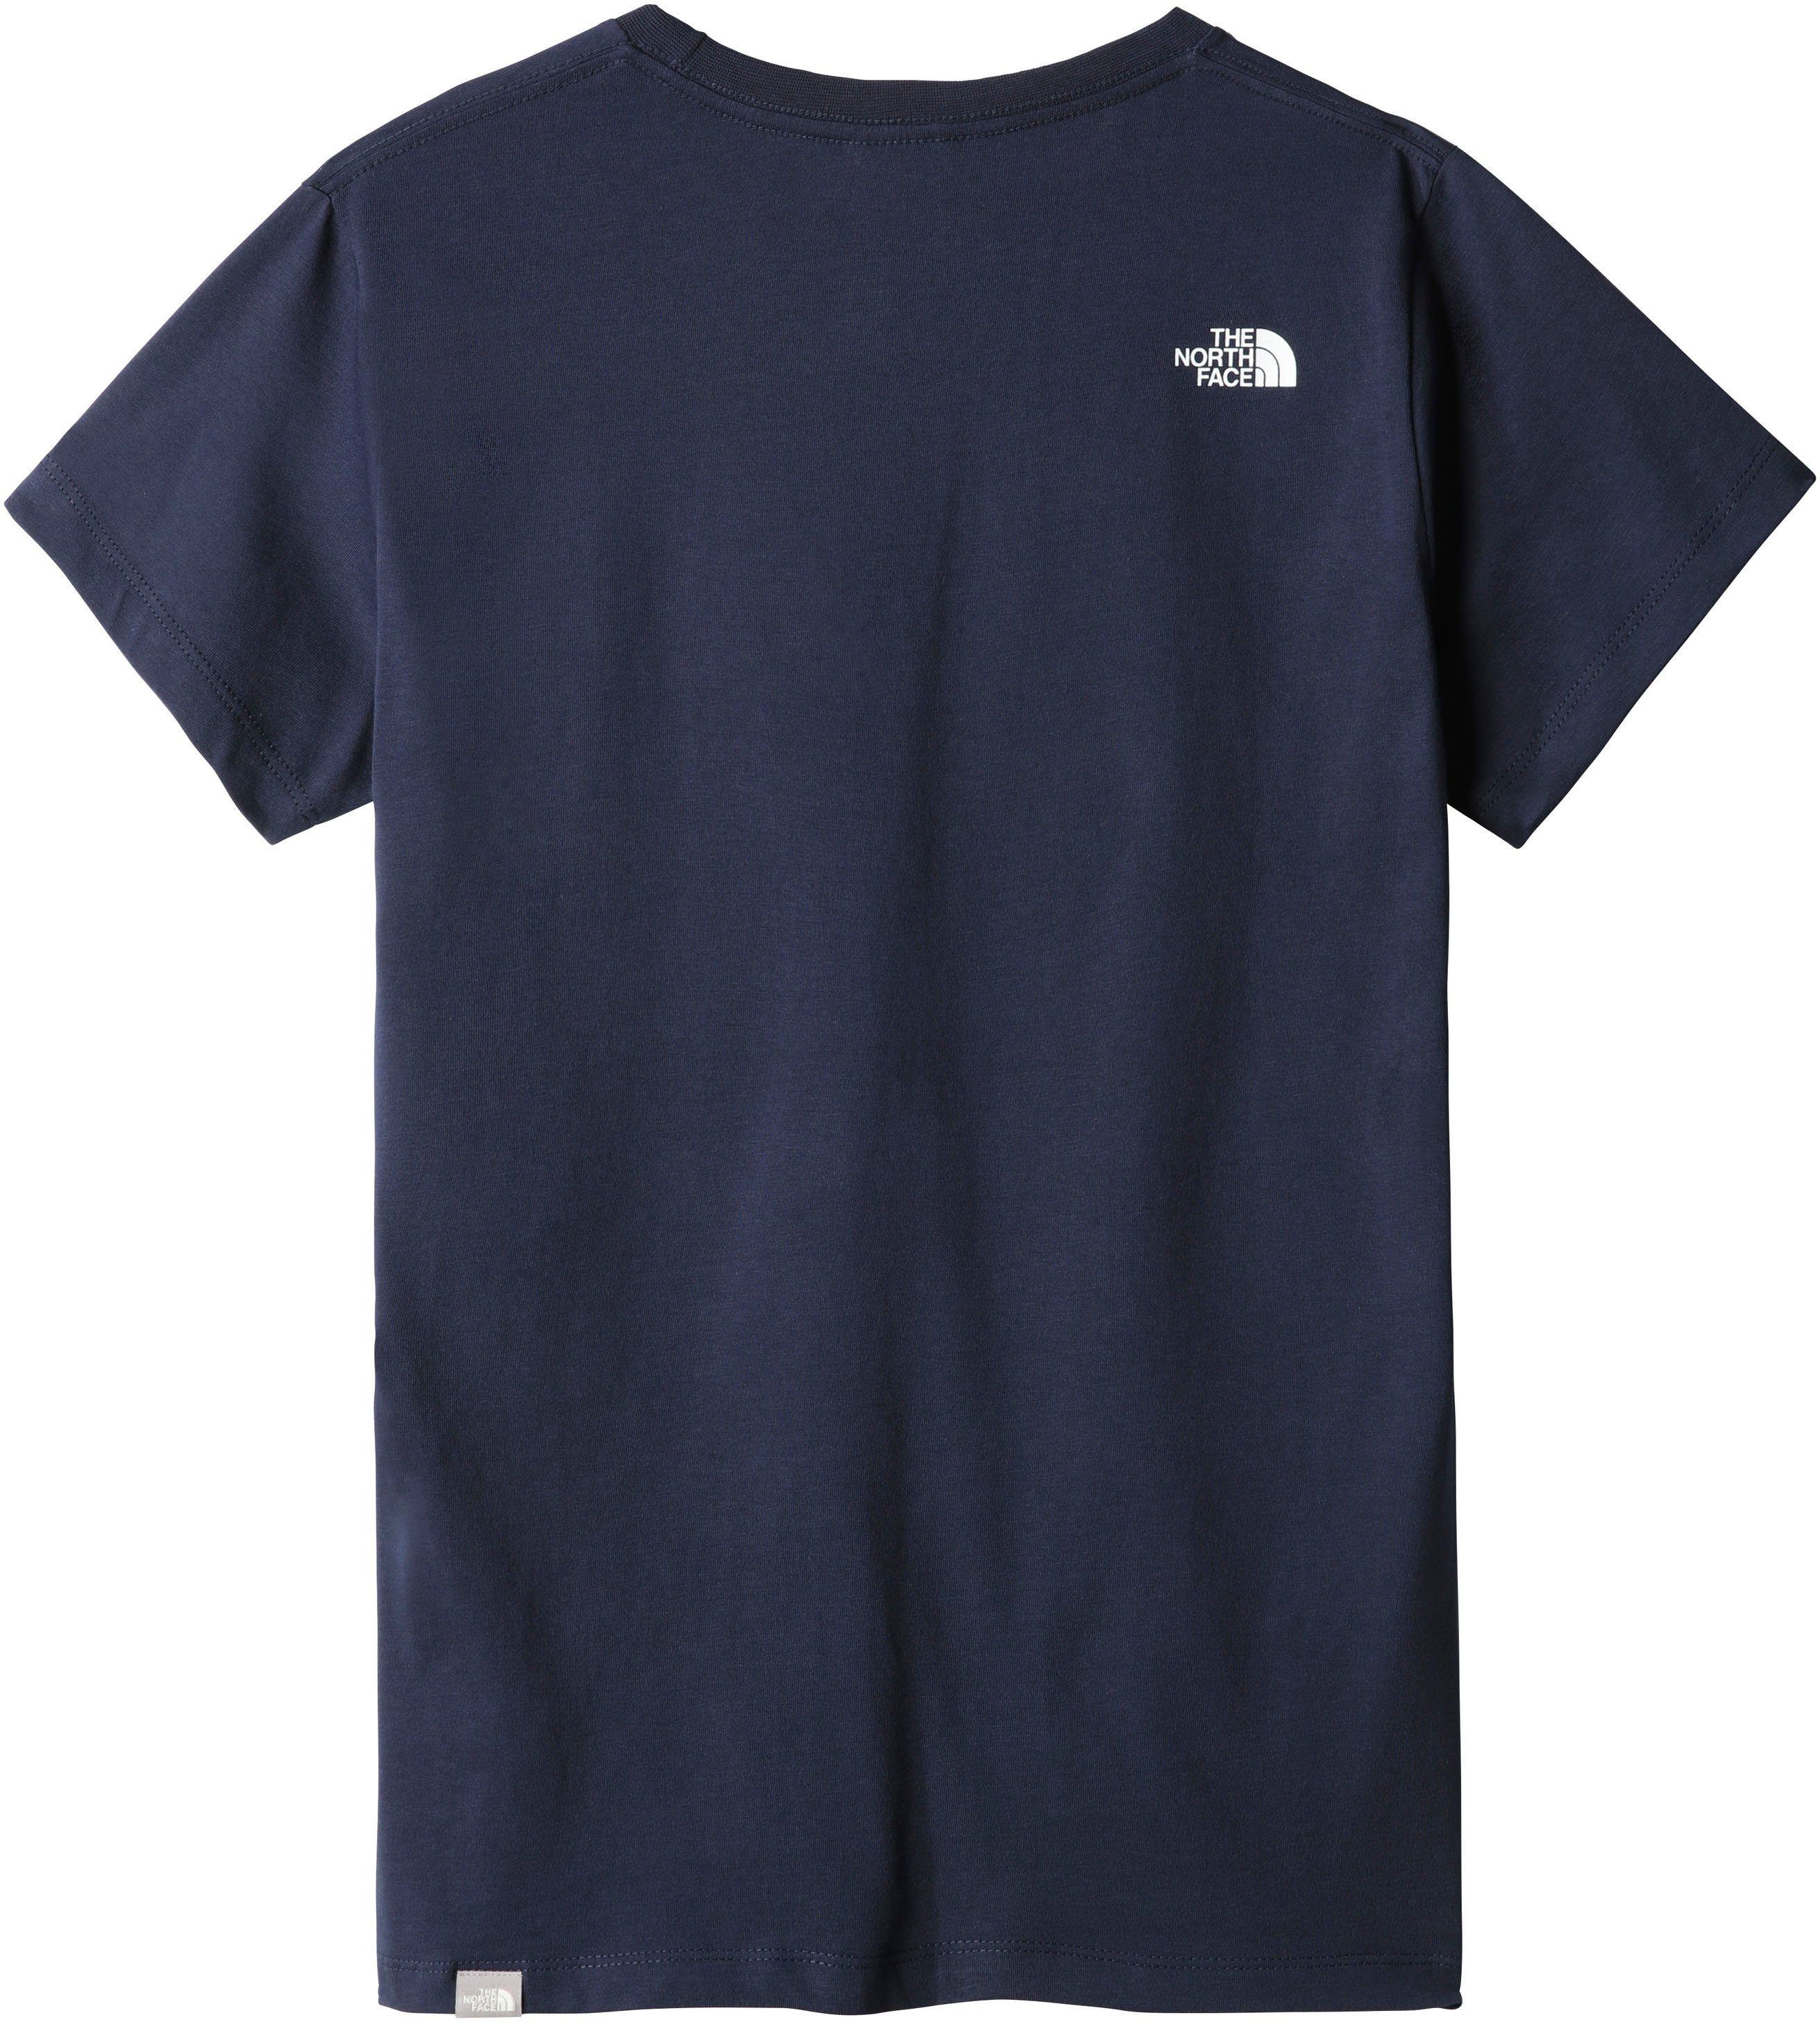 Logodruck Face T-Shirt DOME SIMPLE North The mit TEE blue